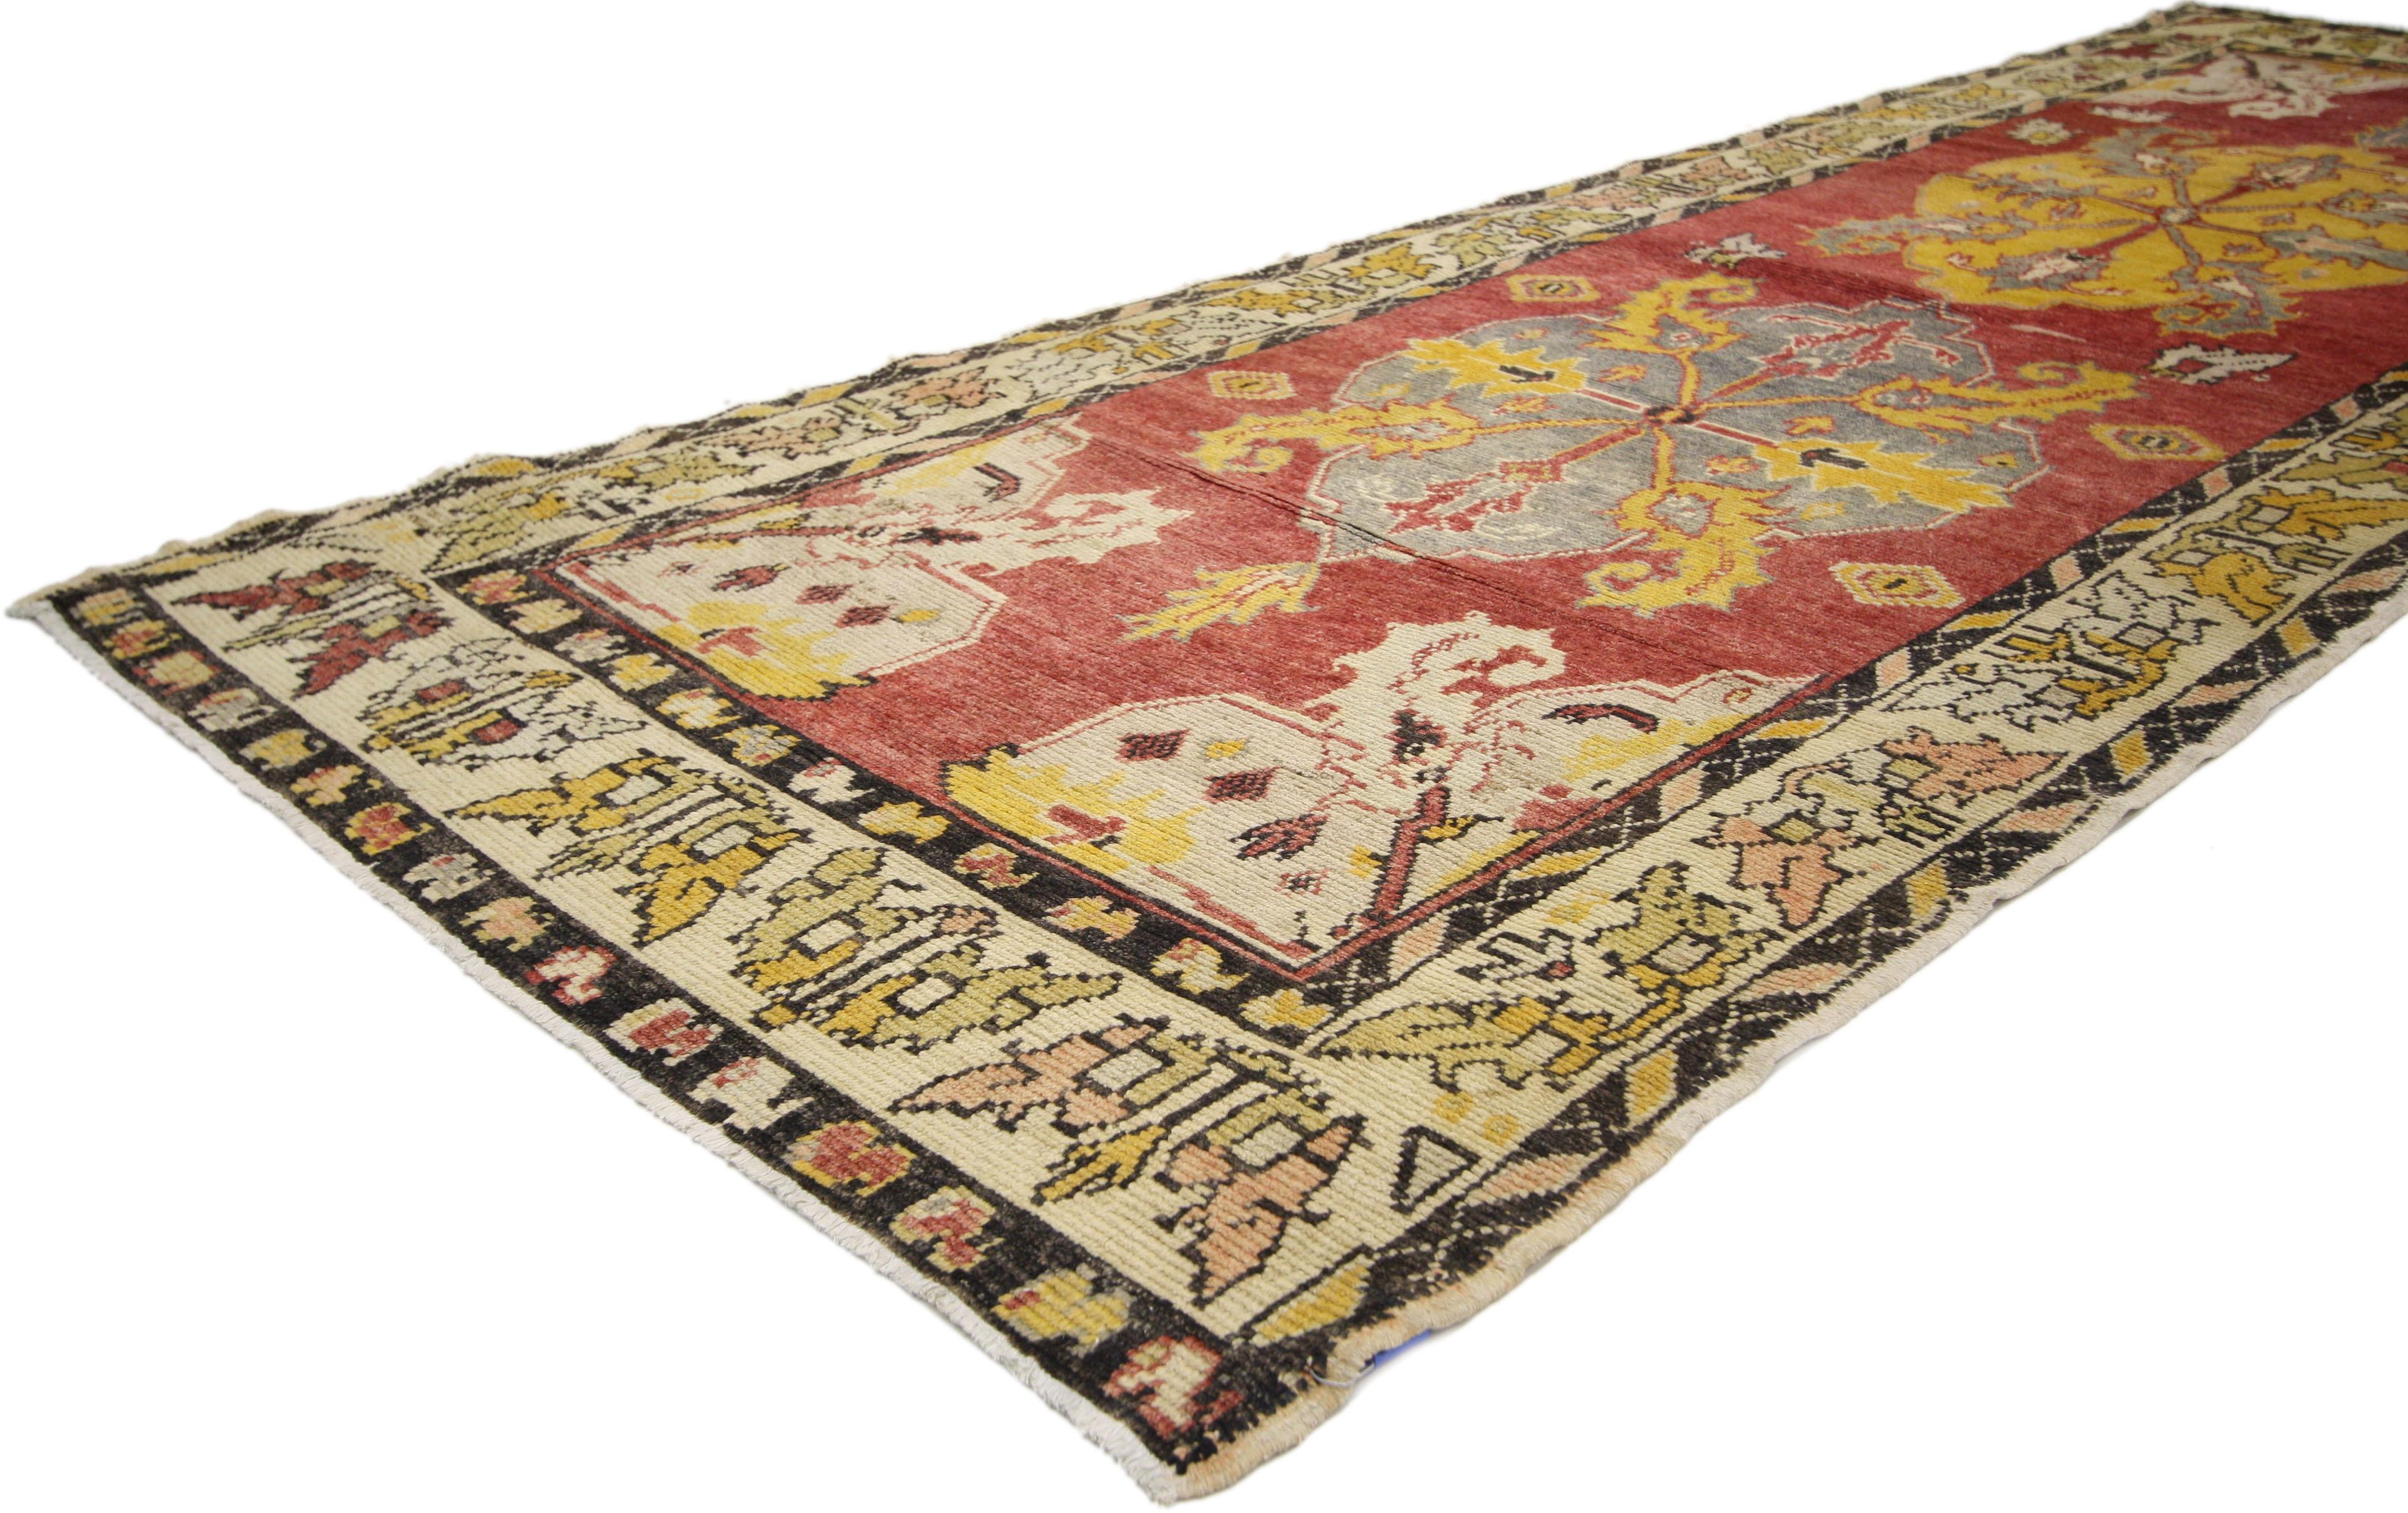 74476 Vintage Turkish Oushak Rug Runner with Mid-Century Modern Style, Hallway Runner. With its stately presence and vibrant colors, this vintage Turkish Oushak carpet runner features a traditional modern style. Along the center, two well-balanced